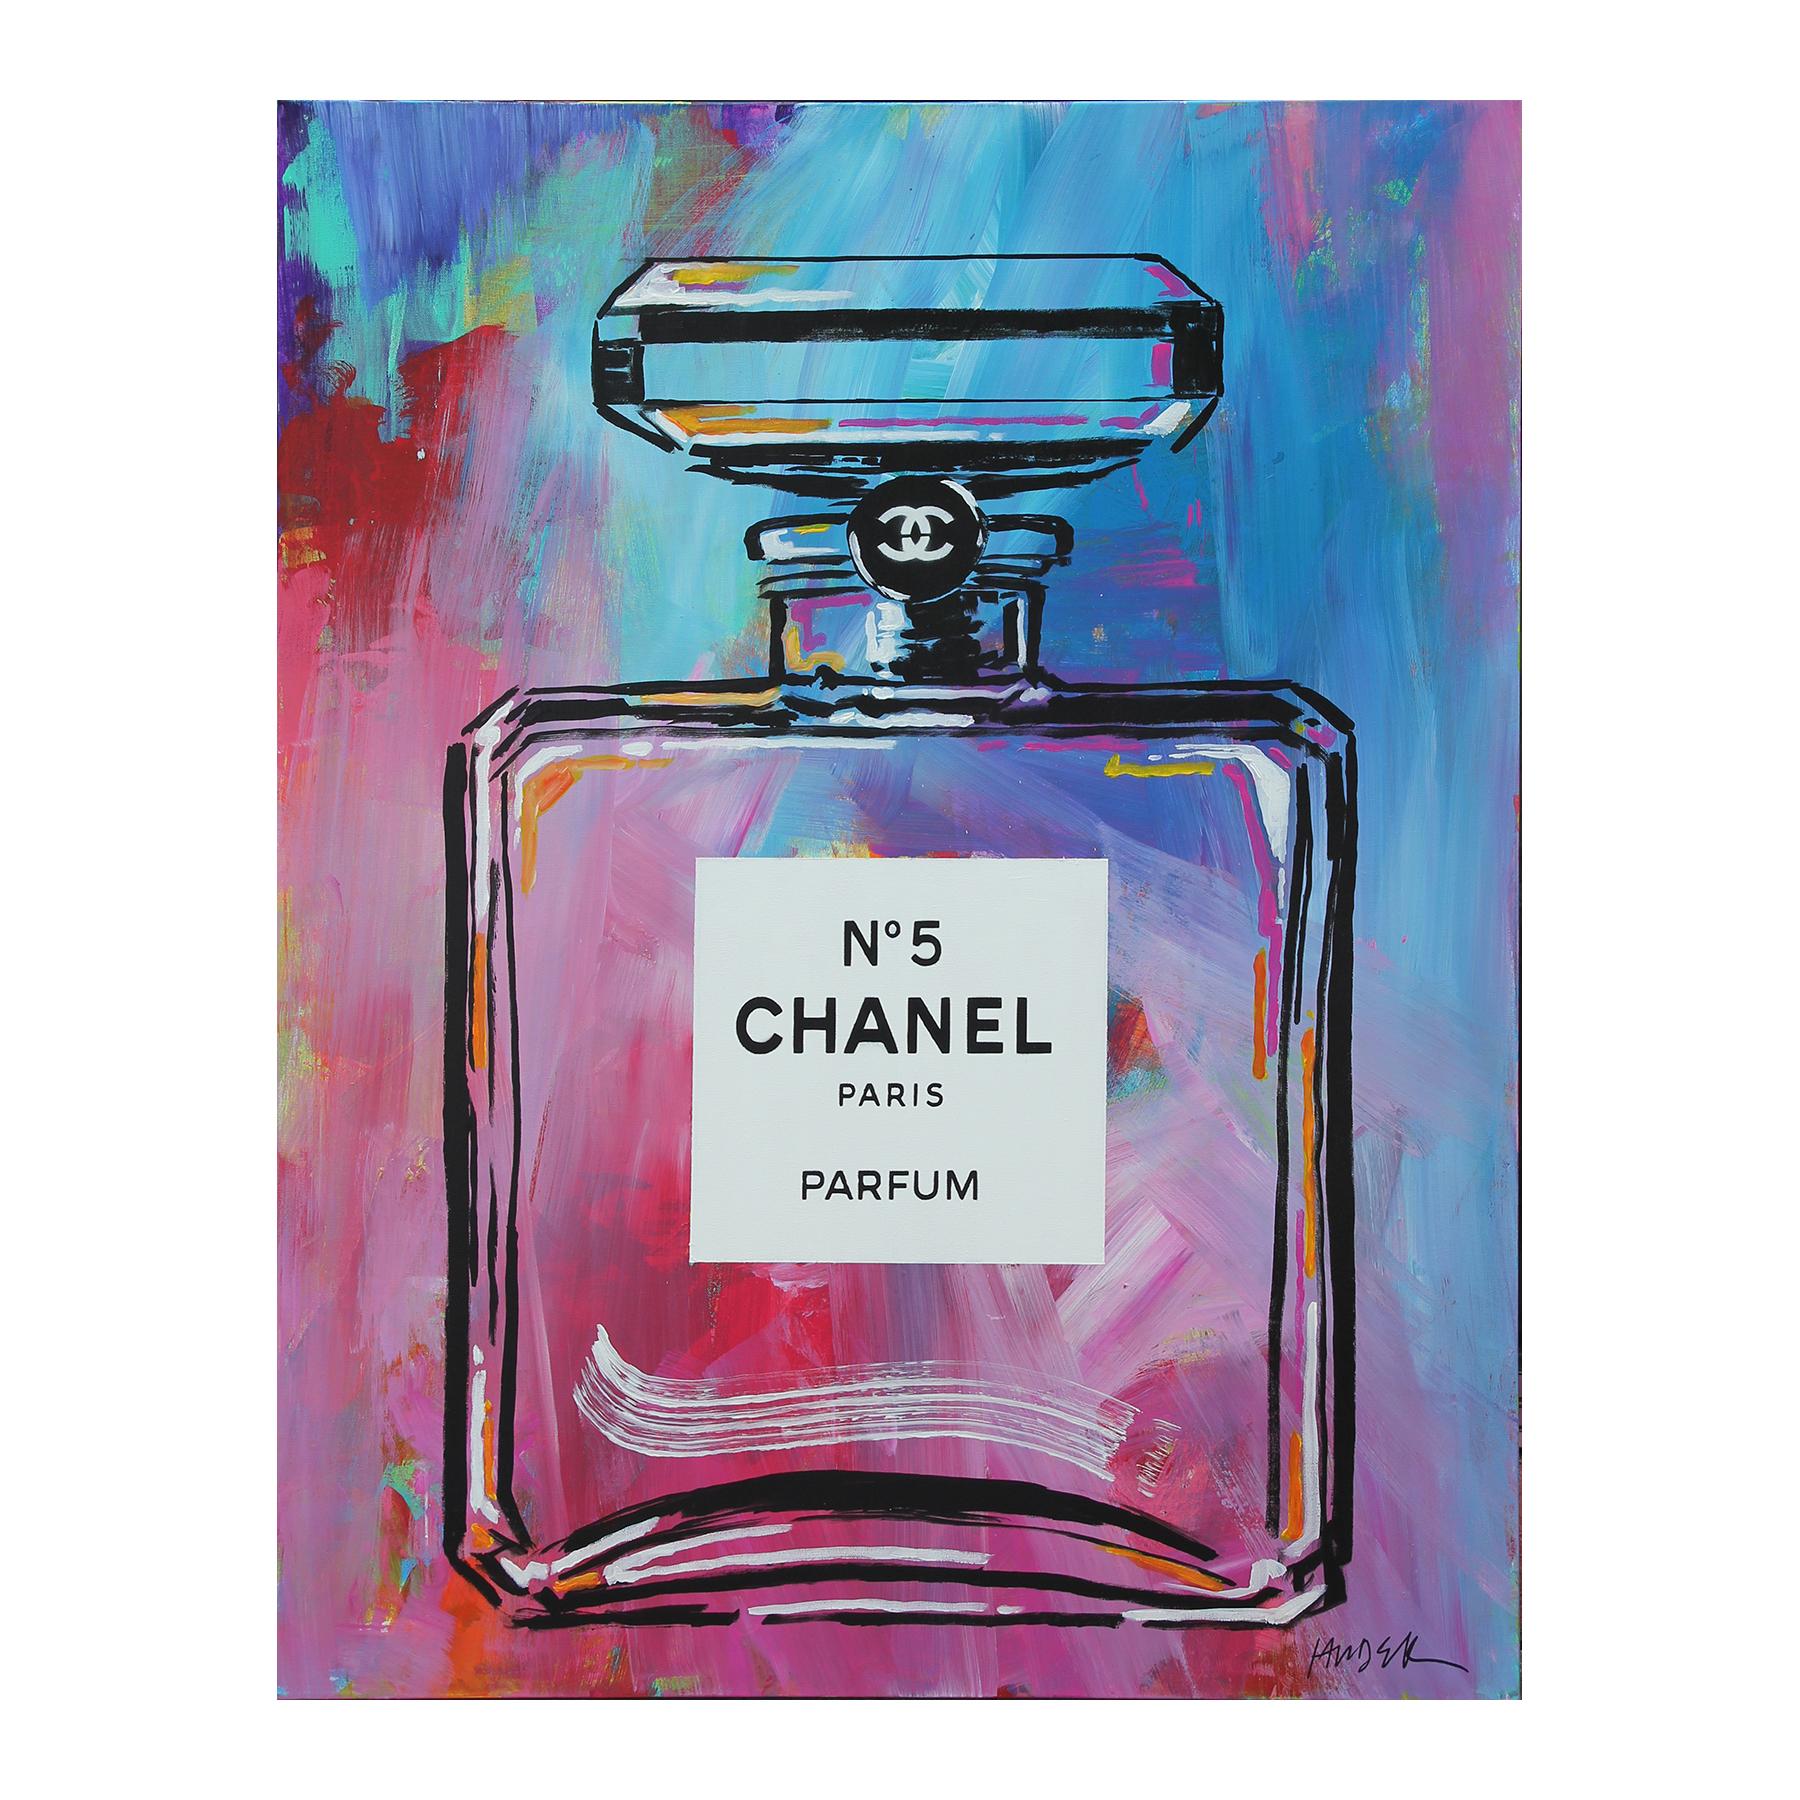 Blue Chanel No. 5 Paris Parfum Bottle Pink and Blue Toned Abstract  Painting